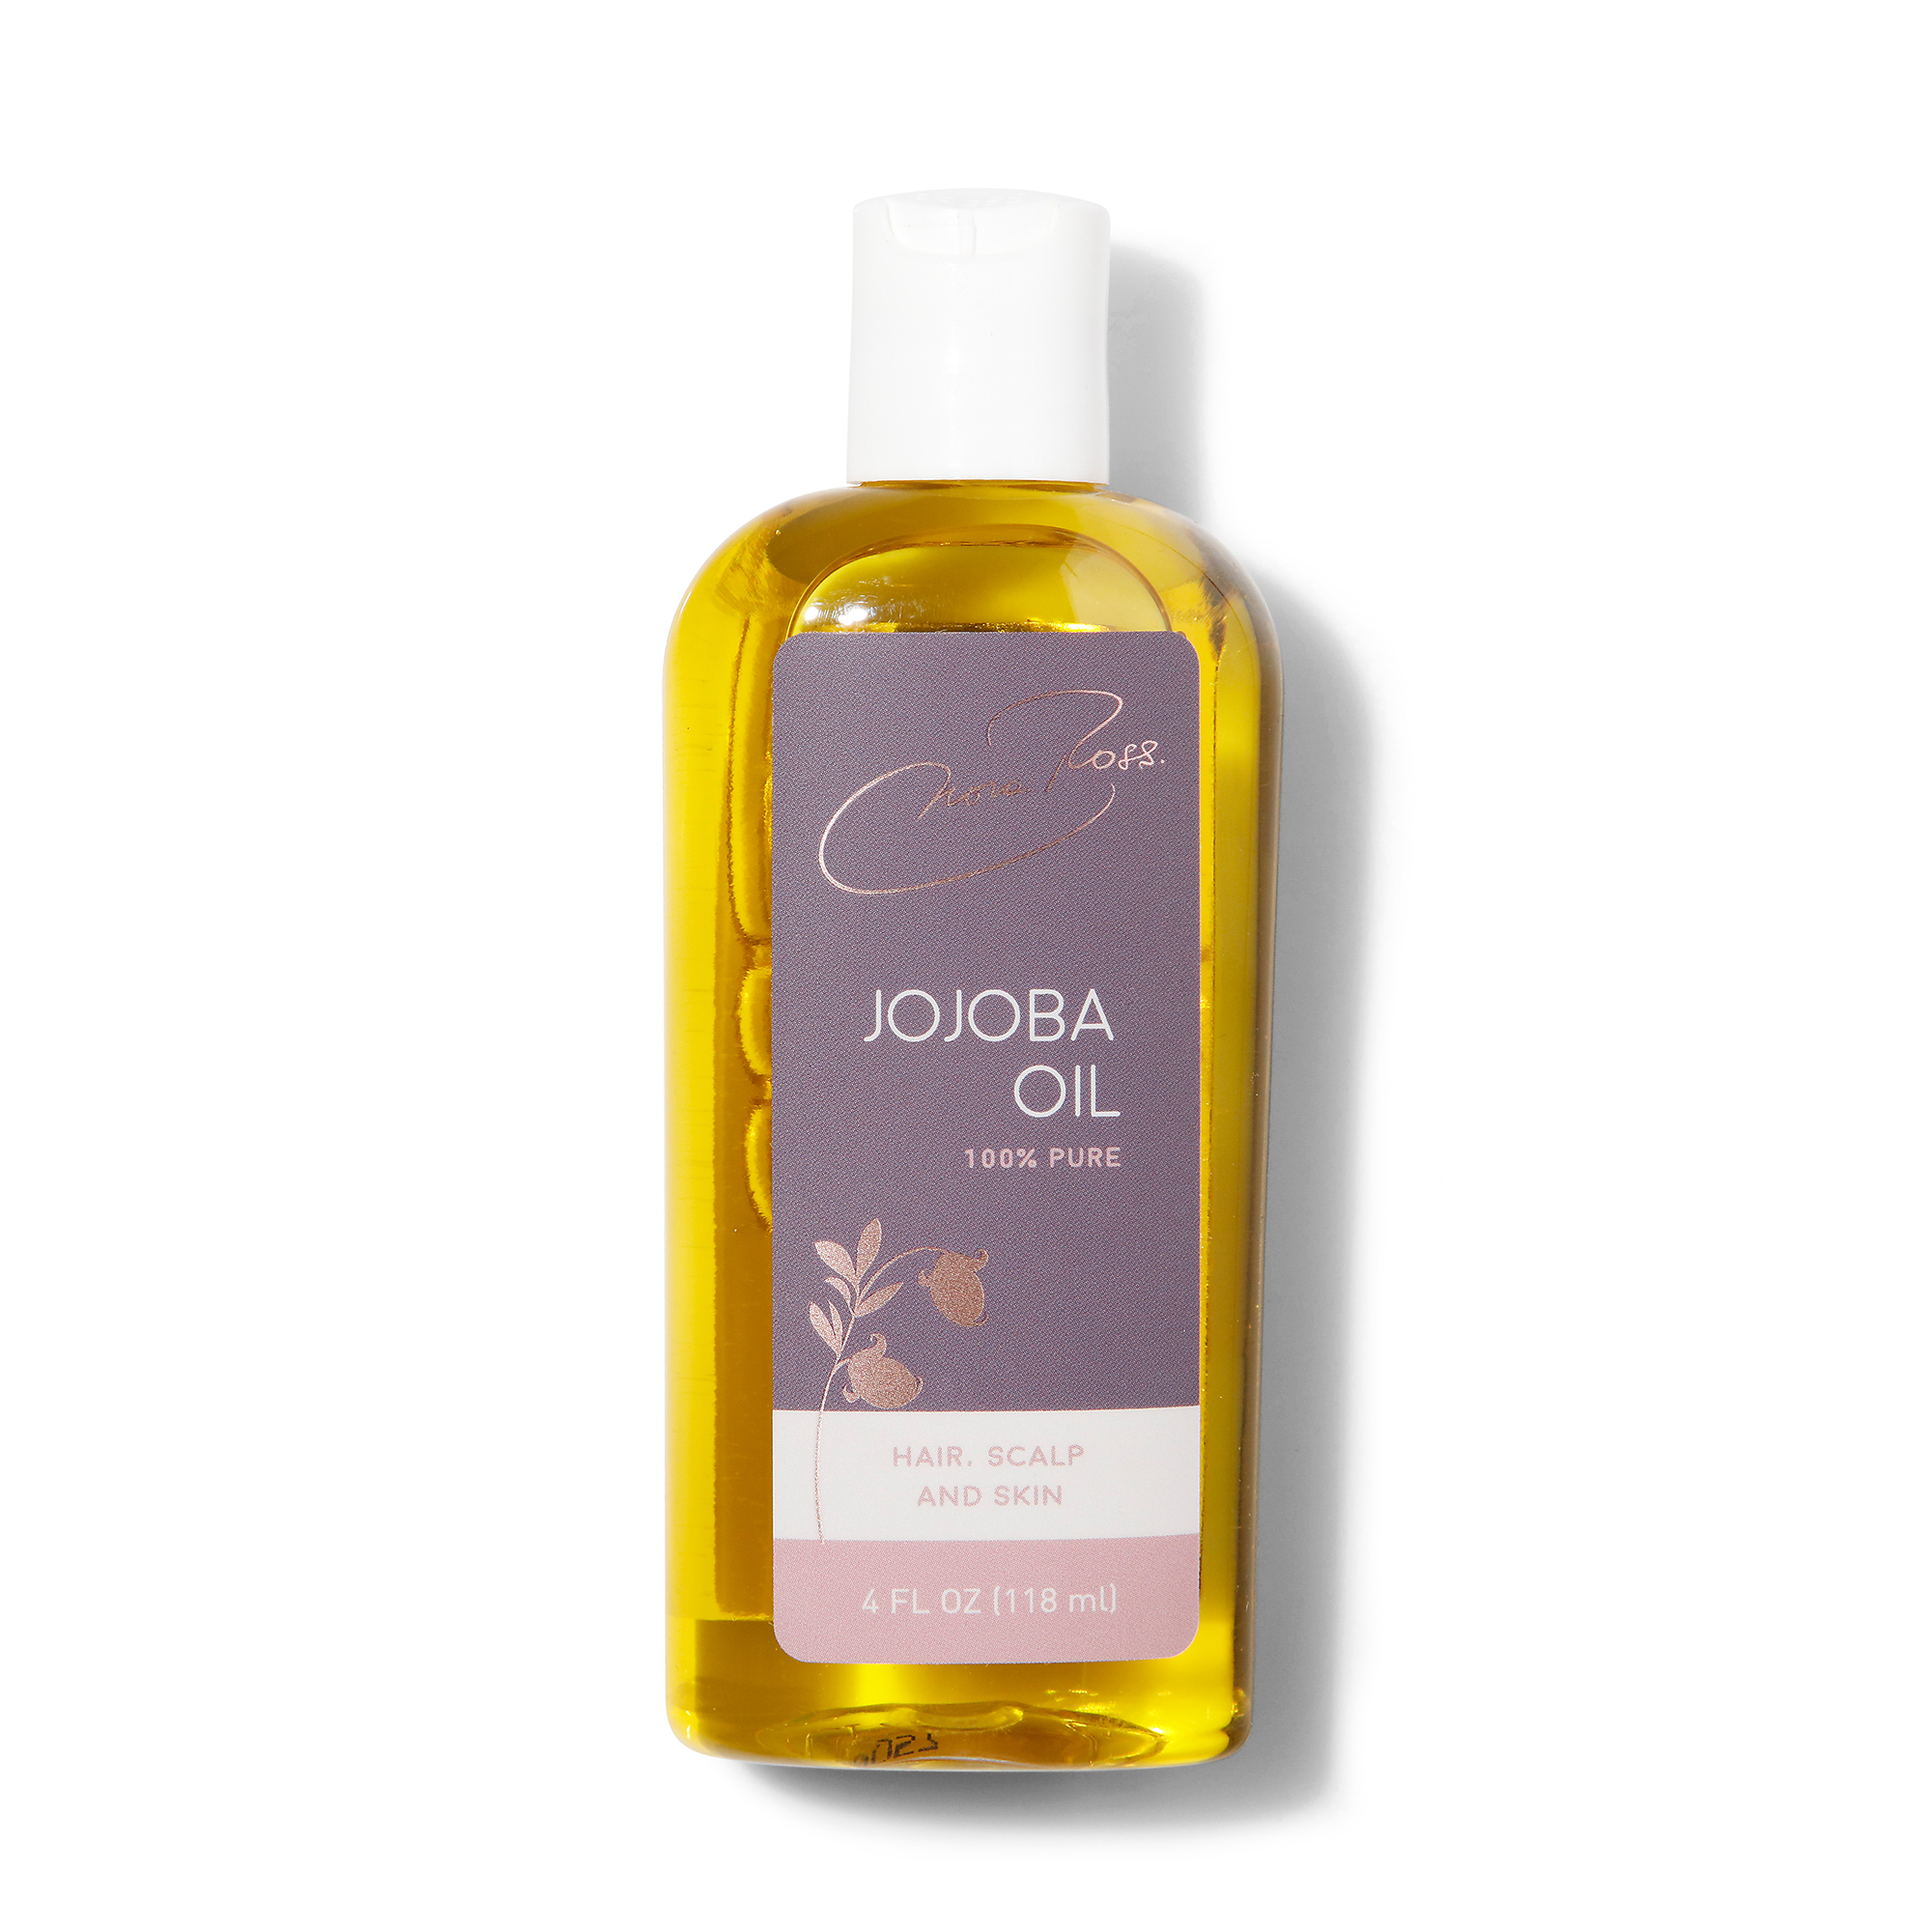 100% Pure Jojoba Oil - Moisturizing Multi-Purpose Oil for Face, Hair and Body - Cold-Pressed Hexane Free